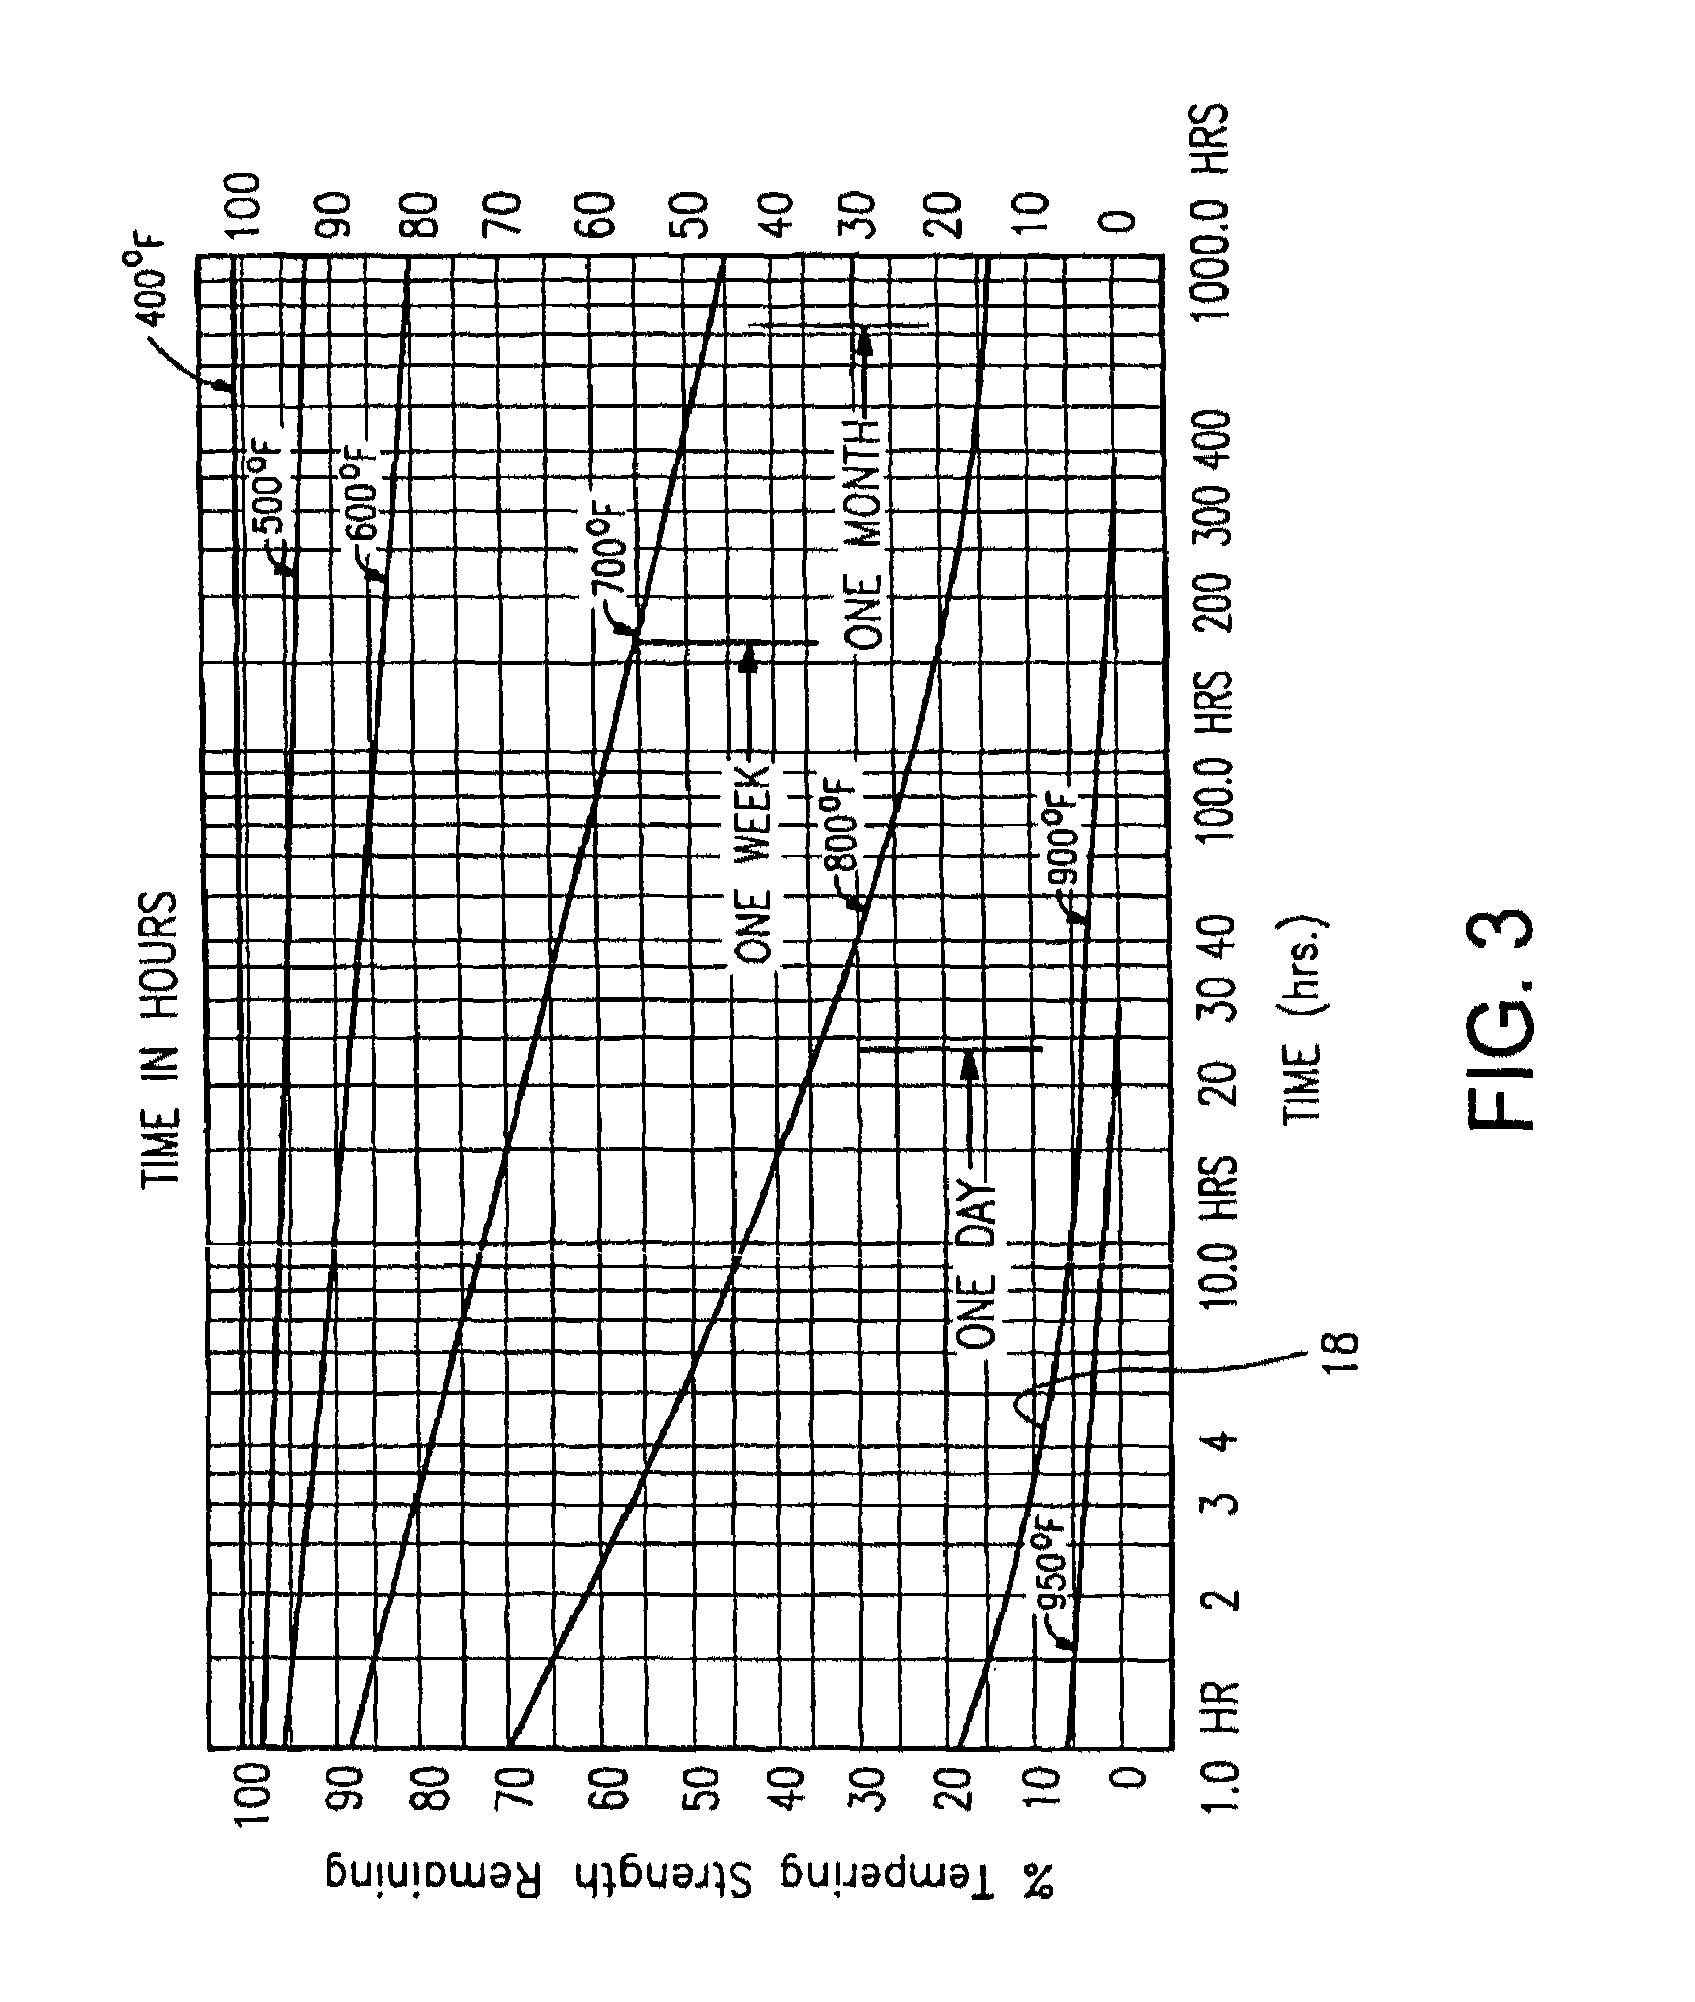 Vacuum insulated glass (VIG) unit including nano-composite pillars, and/or methods of making the same